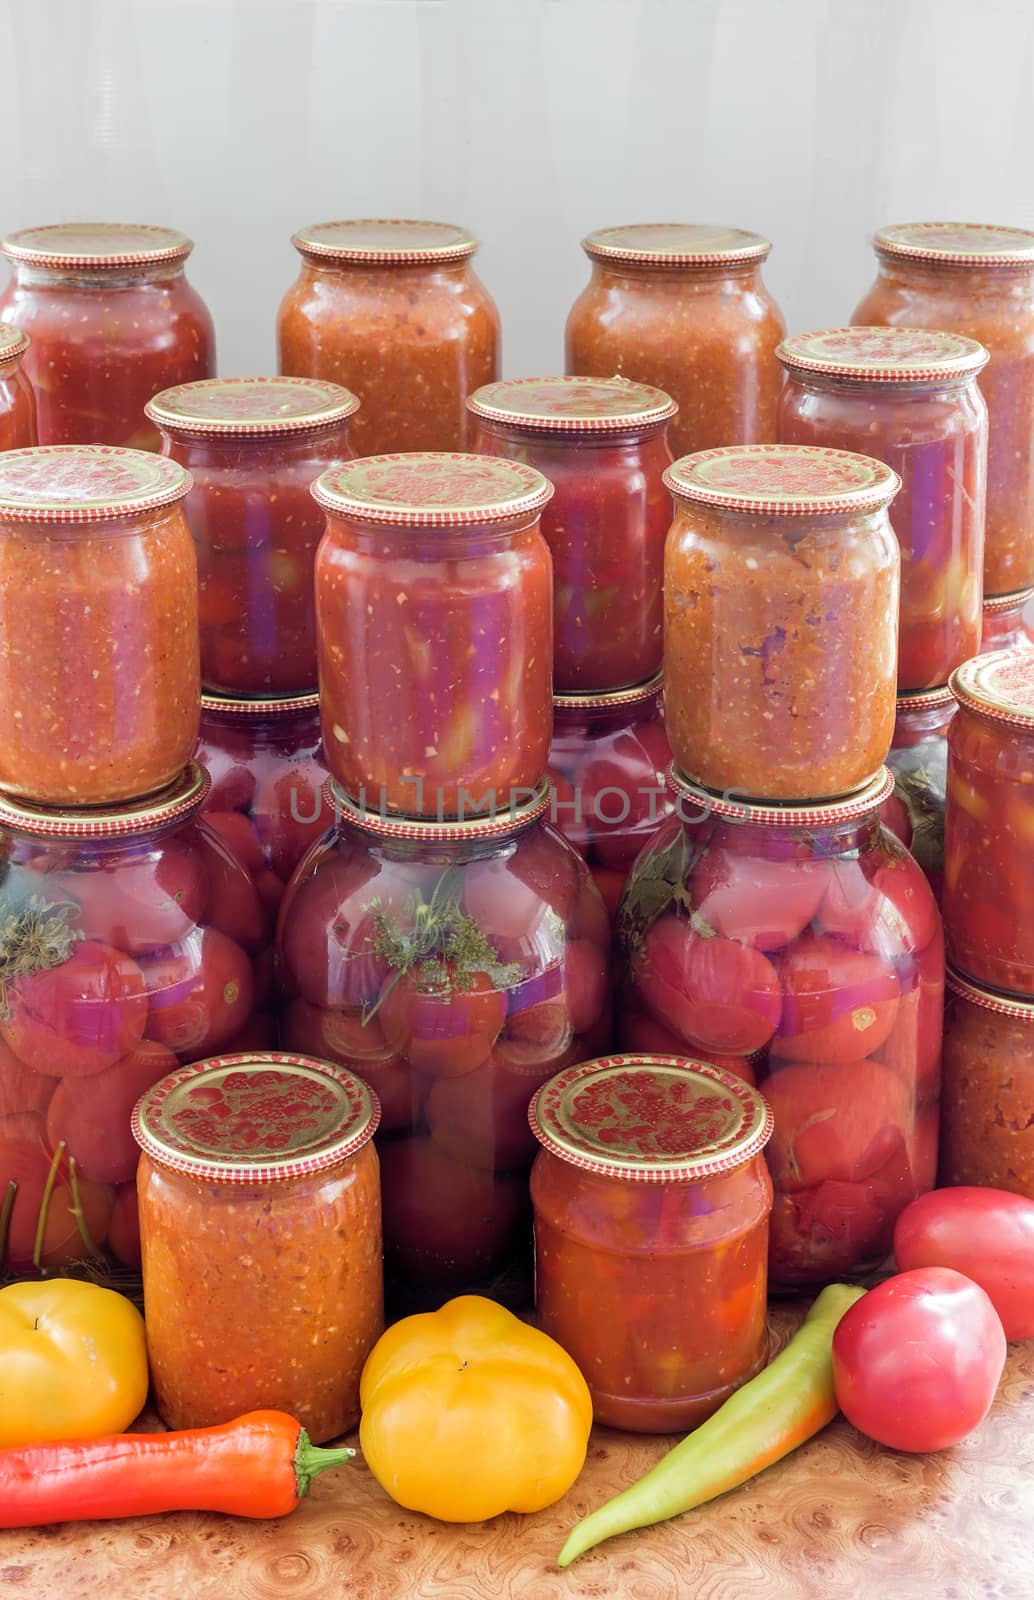 In glass jars Lecho of canned bell peppers and tomatoes, adjika, canned tomatoes, near fresh peppers and tomatoes